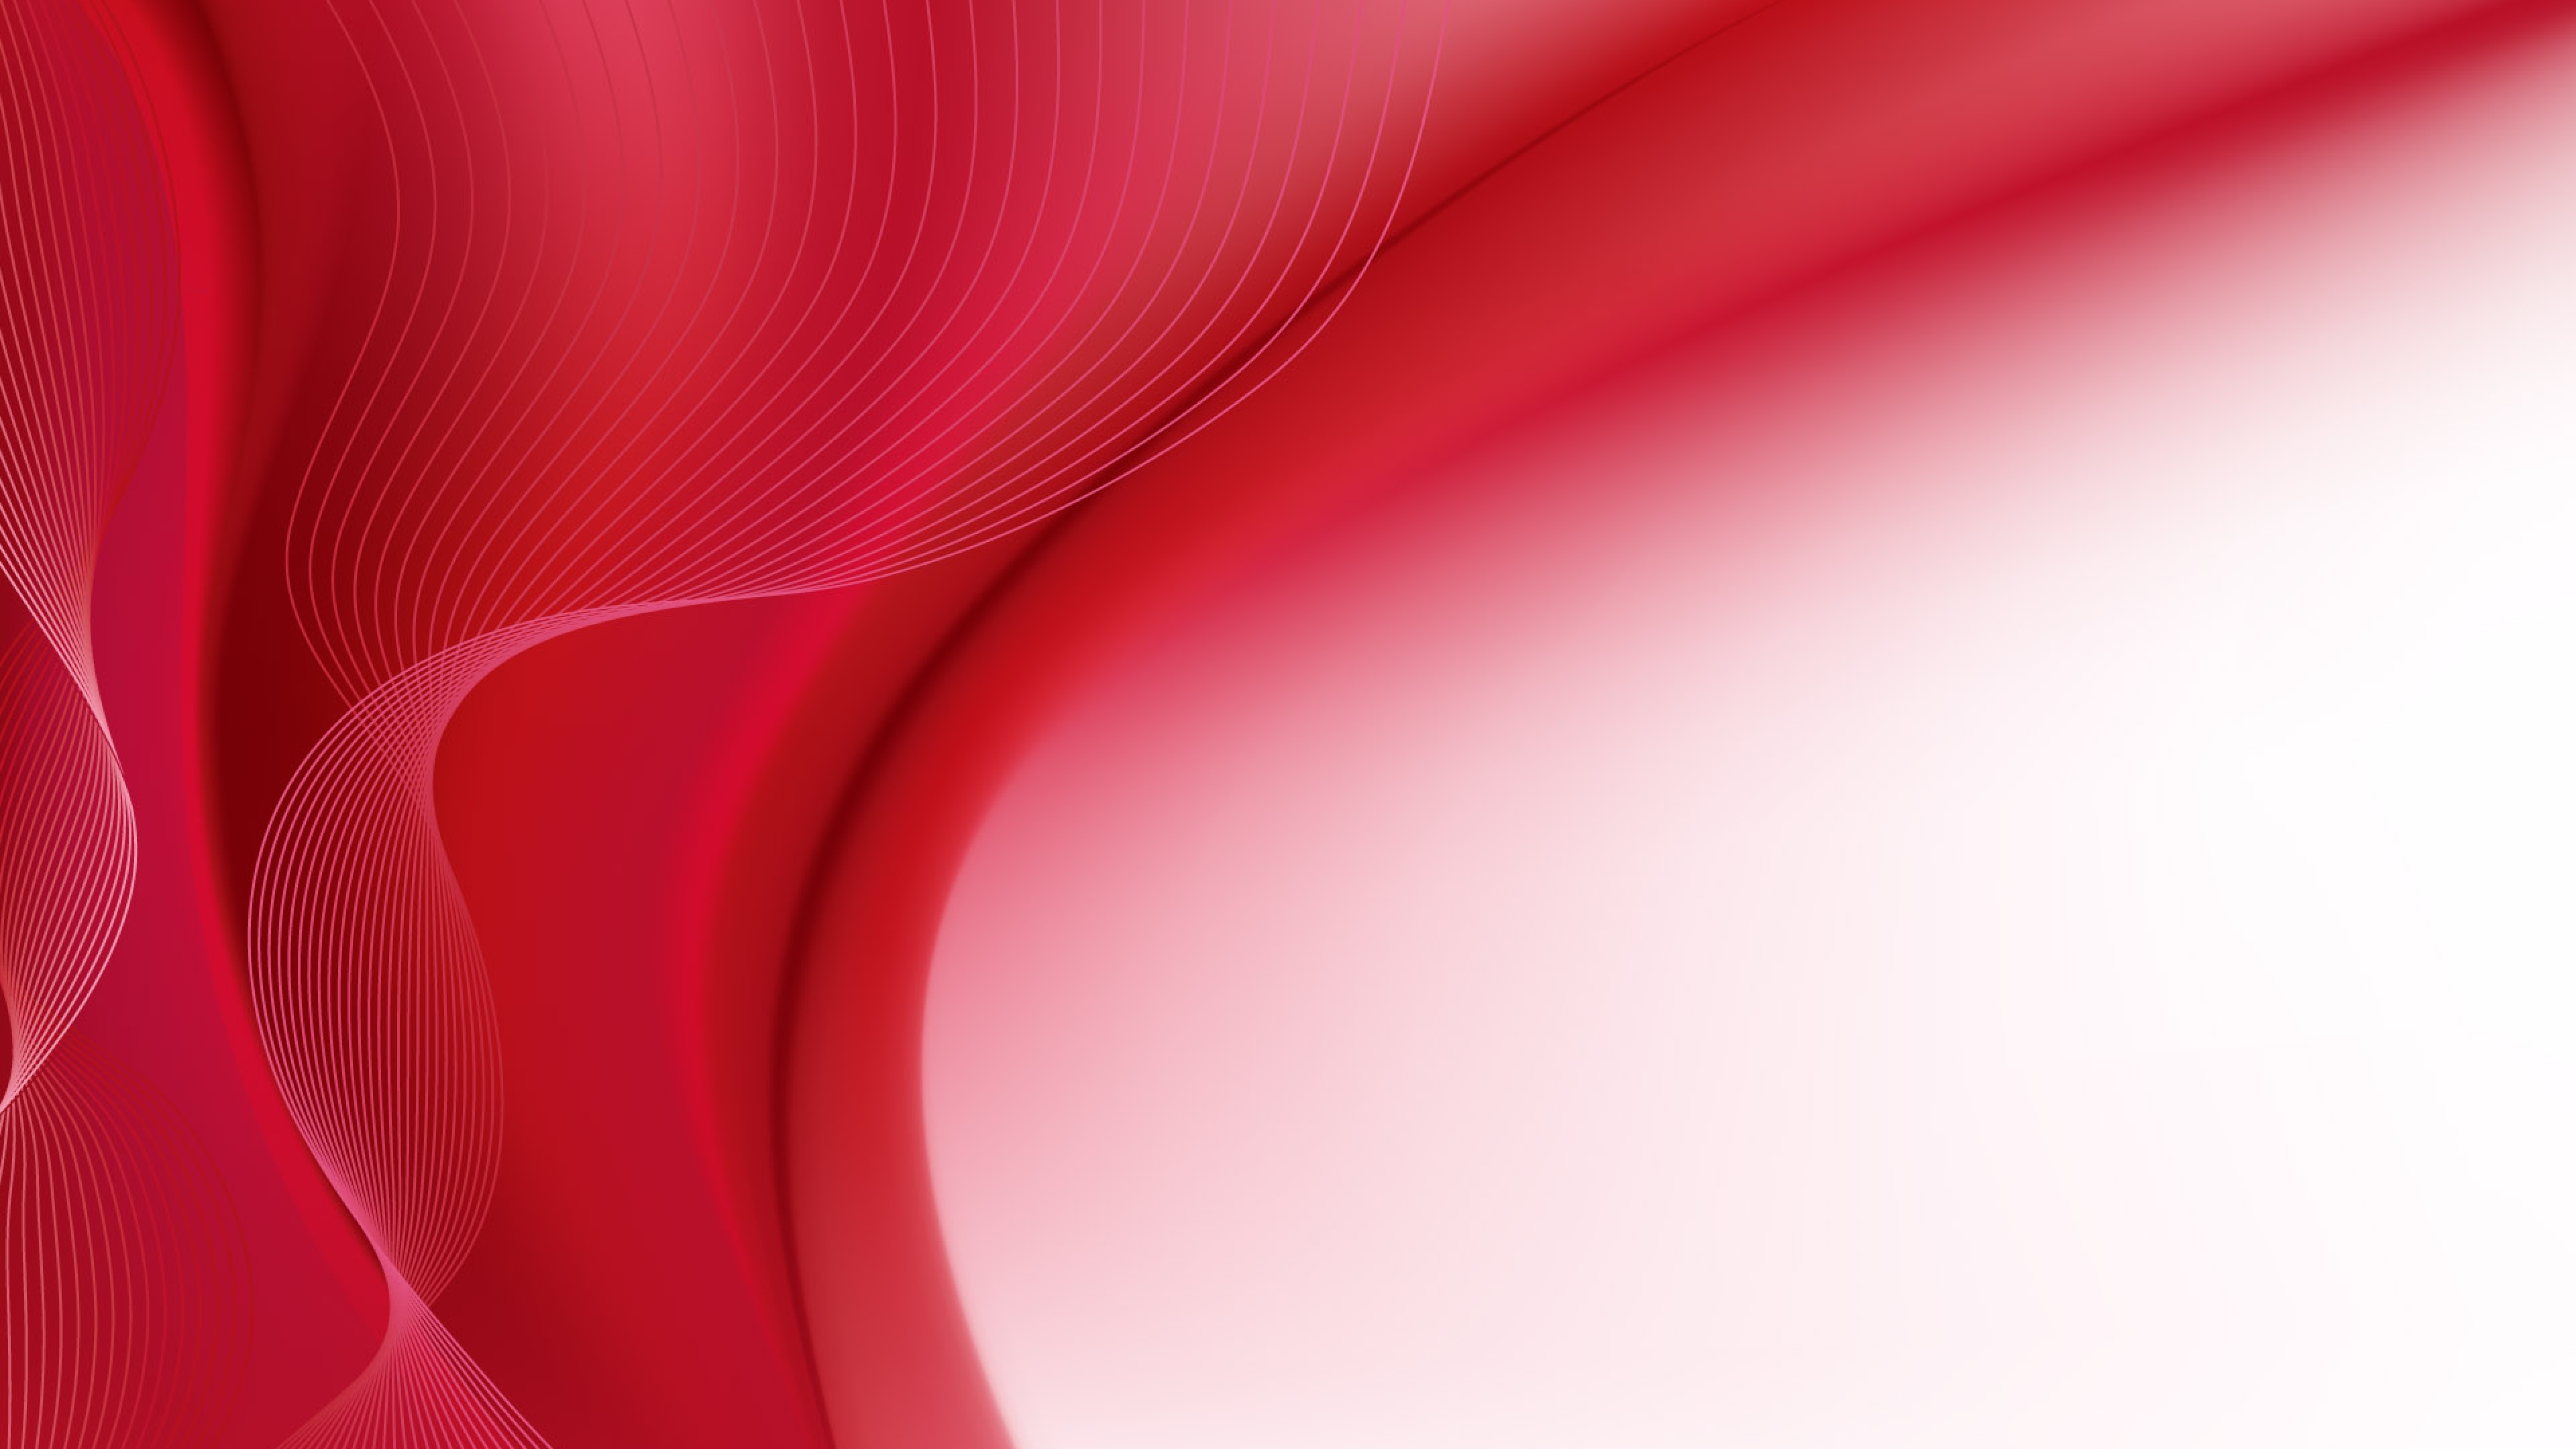 Beige and Red Rouge Abstract Fluid Pattern Design by patternsoup |  Redbubble | Iphone background wallpaper, Phone wallpaper patterns,  Aesthetic iphone wallpaper